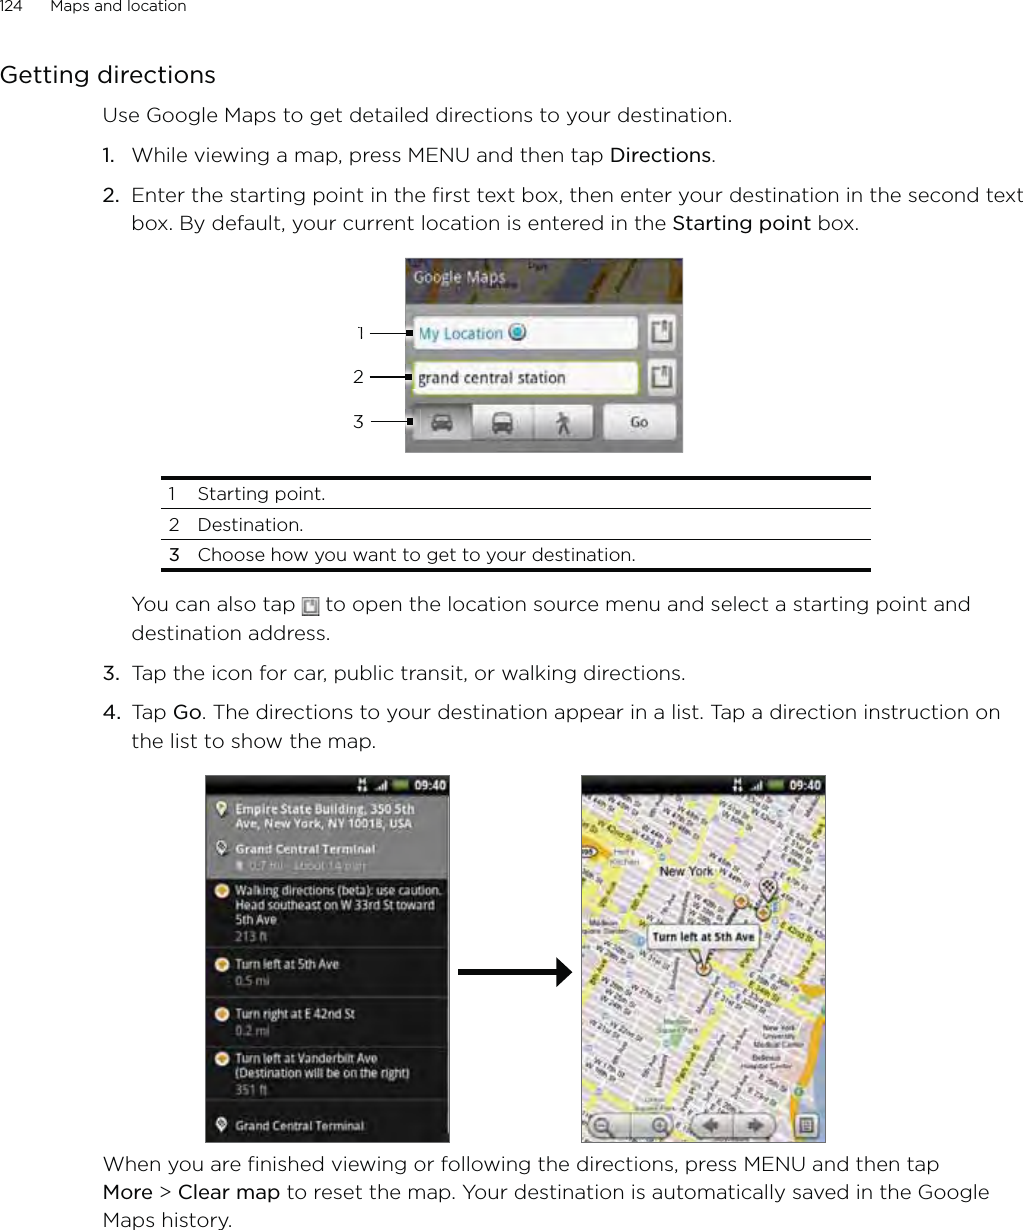 124      Maps and location      Getting directionsUse Google Maps to get detailed directions to your destination.While viewing a map, press MENU and then tap Directions.Enter the starting point in the first text box, then enter your destination in the second text box. By default, your current location is entered in the Starting point box.312111112222333331 Starting point. 2 Destination.3 Choose how you want to get to your destination.You can also tap   to open the location source menu and select a starting point and destination address.3.  Tap the icon for car, public transit, or walking directions.4.  Tap Go. The directions to your destination appear in a list. Tap a direction instruction on the list to show the map. When you are finished viewing or following the directions, press MENU and then tap More &gt; Clear map to reset the map. Your destination is automatically saved in the Google Maps history.1.2.